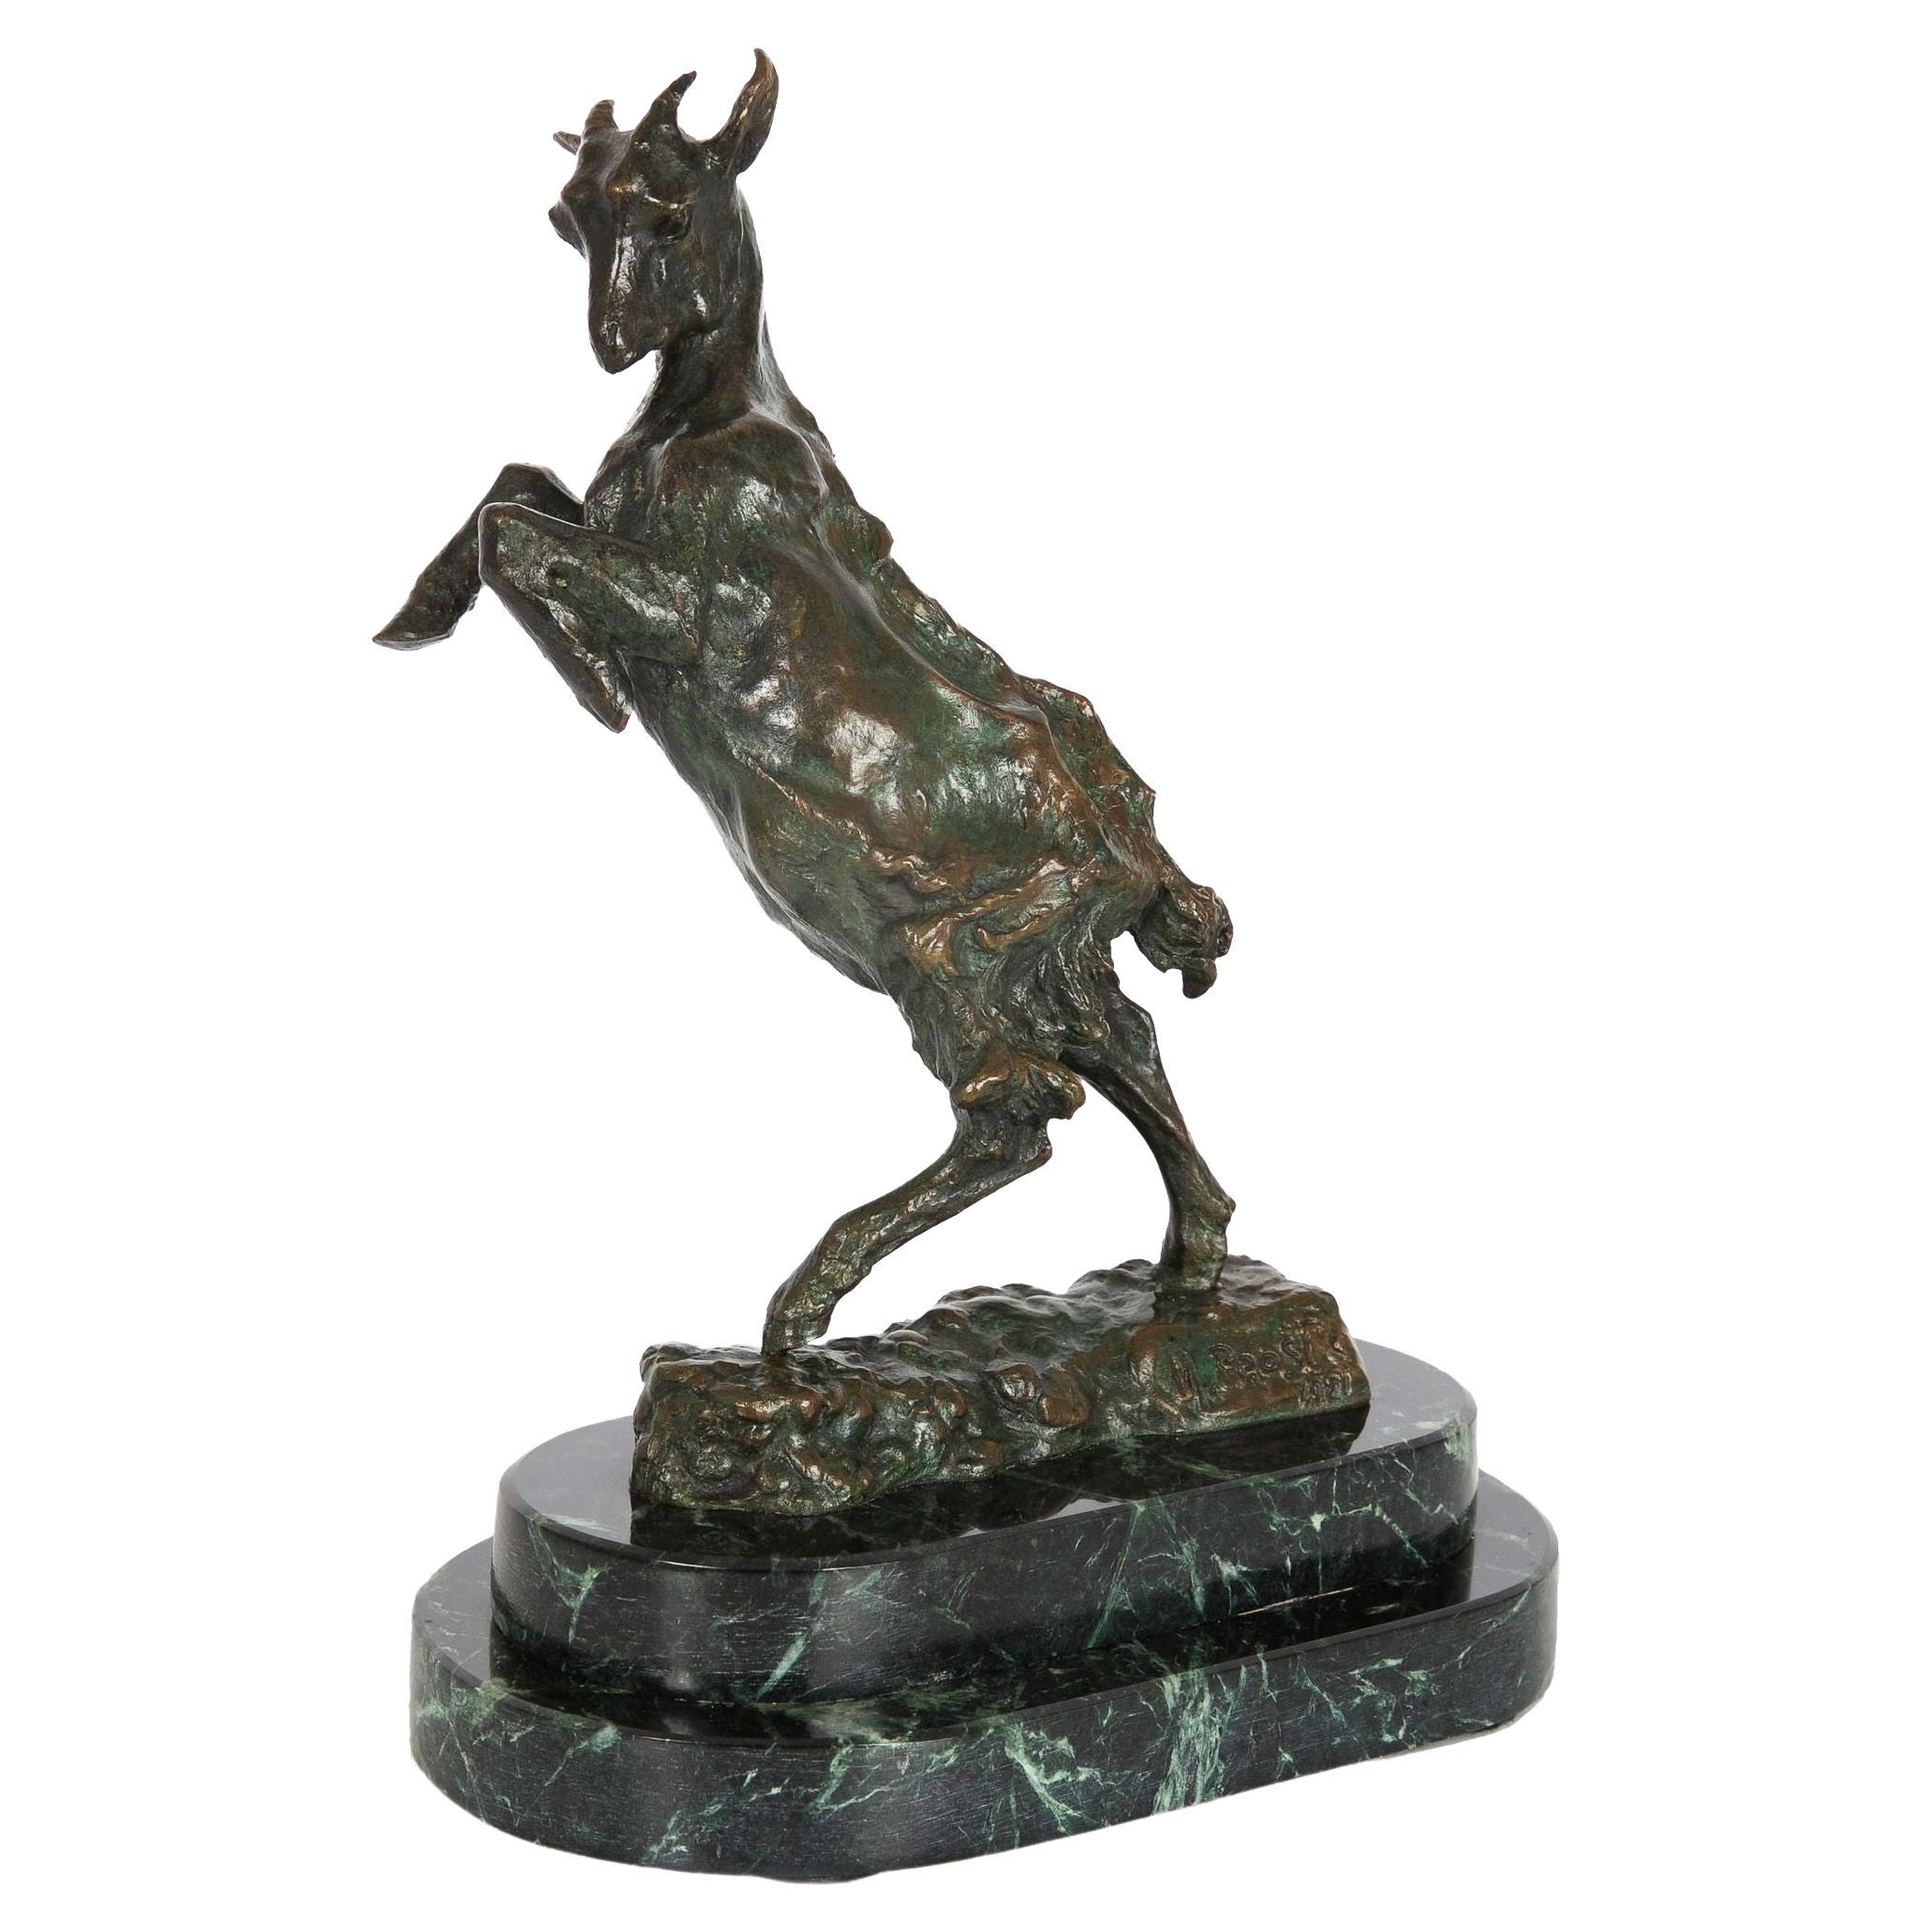 French Art Deco Bronze Sculpture of “Jumping Goat”, Bookend by Maurice Prost